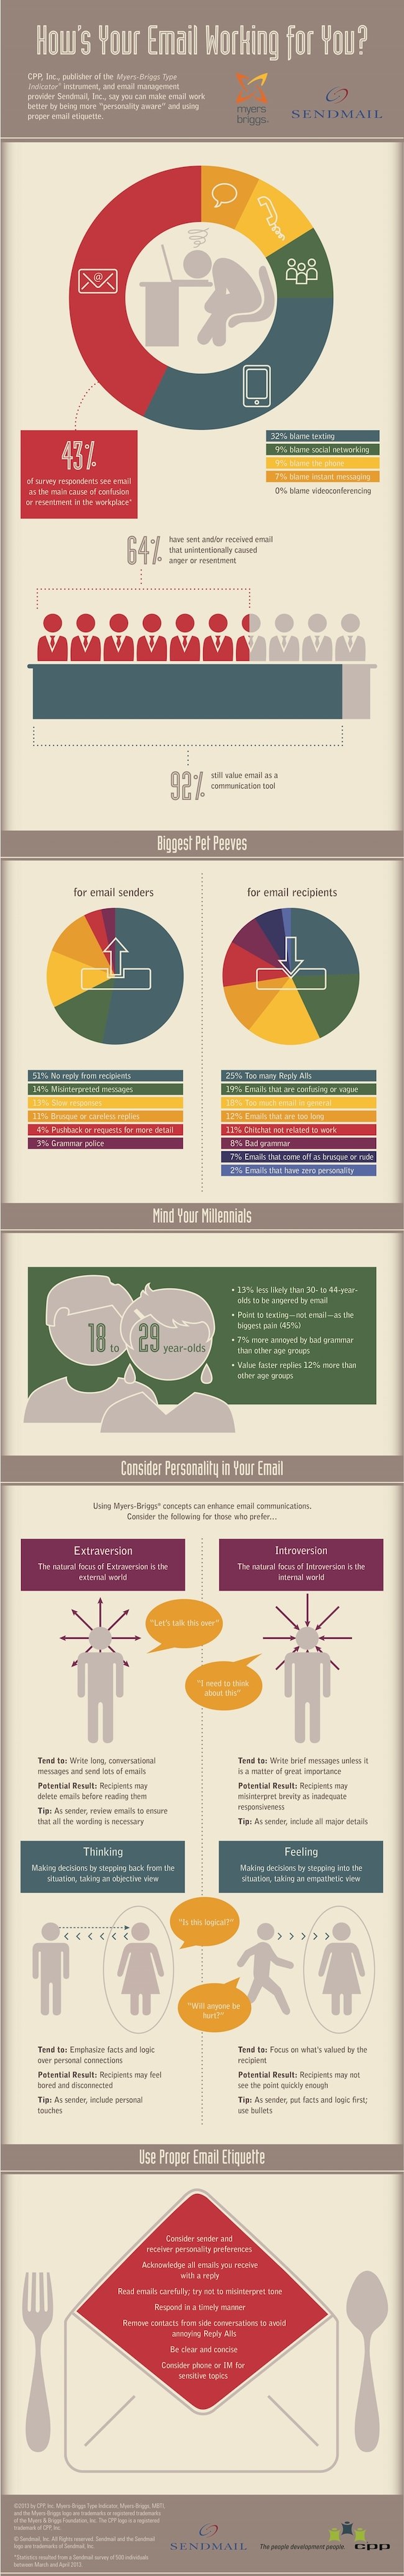 How's Your Email Working for You [Infographic]